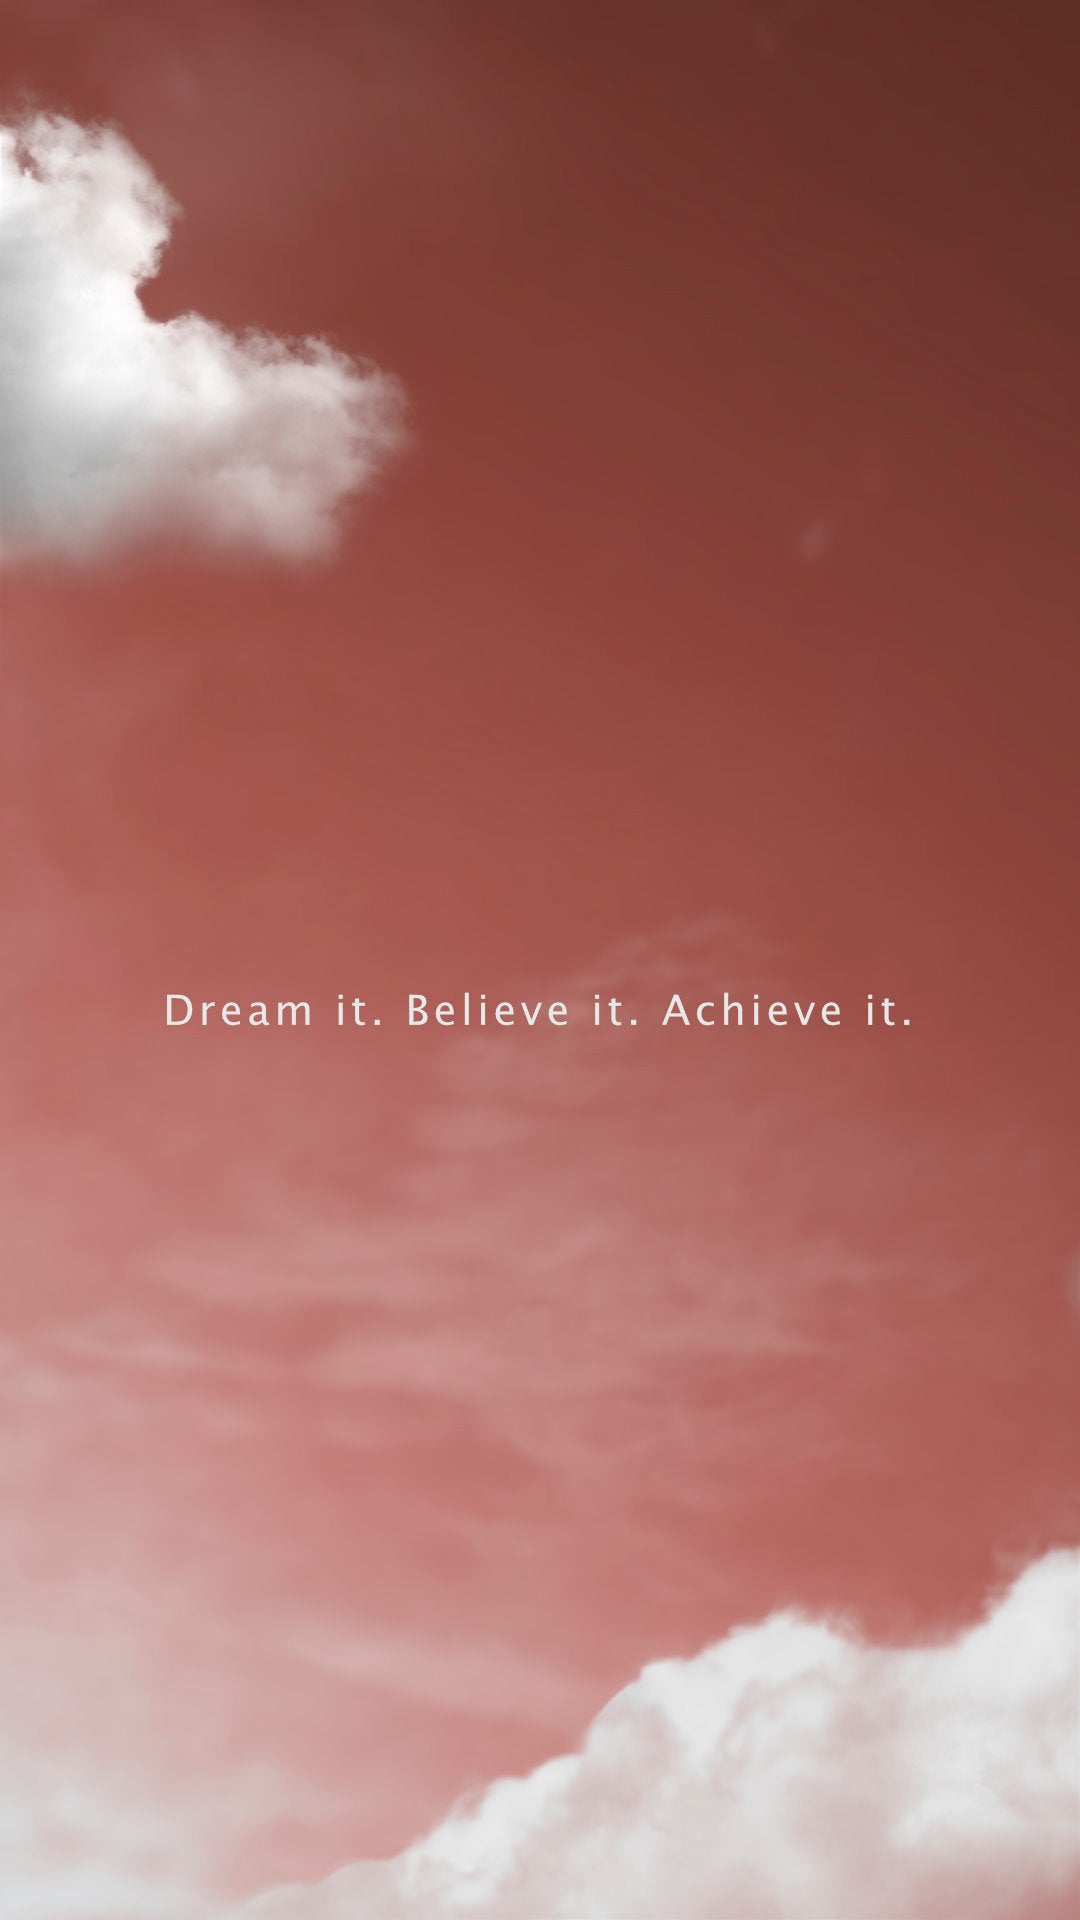 Dream it. Believe it. Achieve it. Quote Poster | Motivational Quotes | Inspirational Prints | Law of Attraction art | Manifest Poster